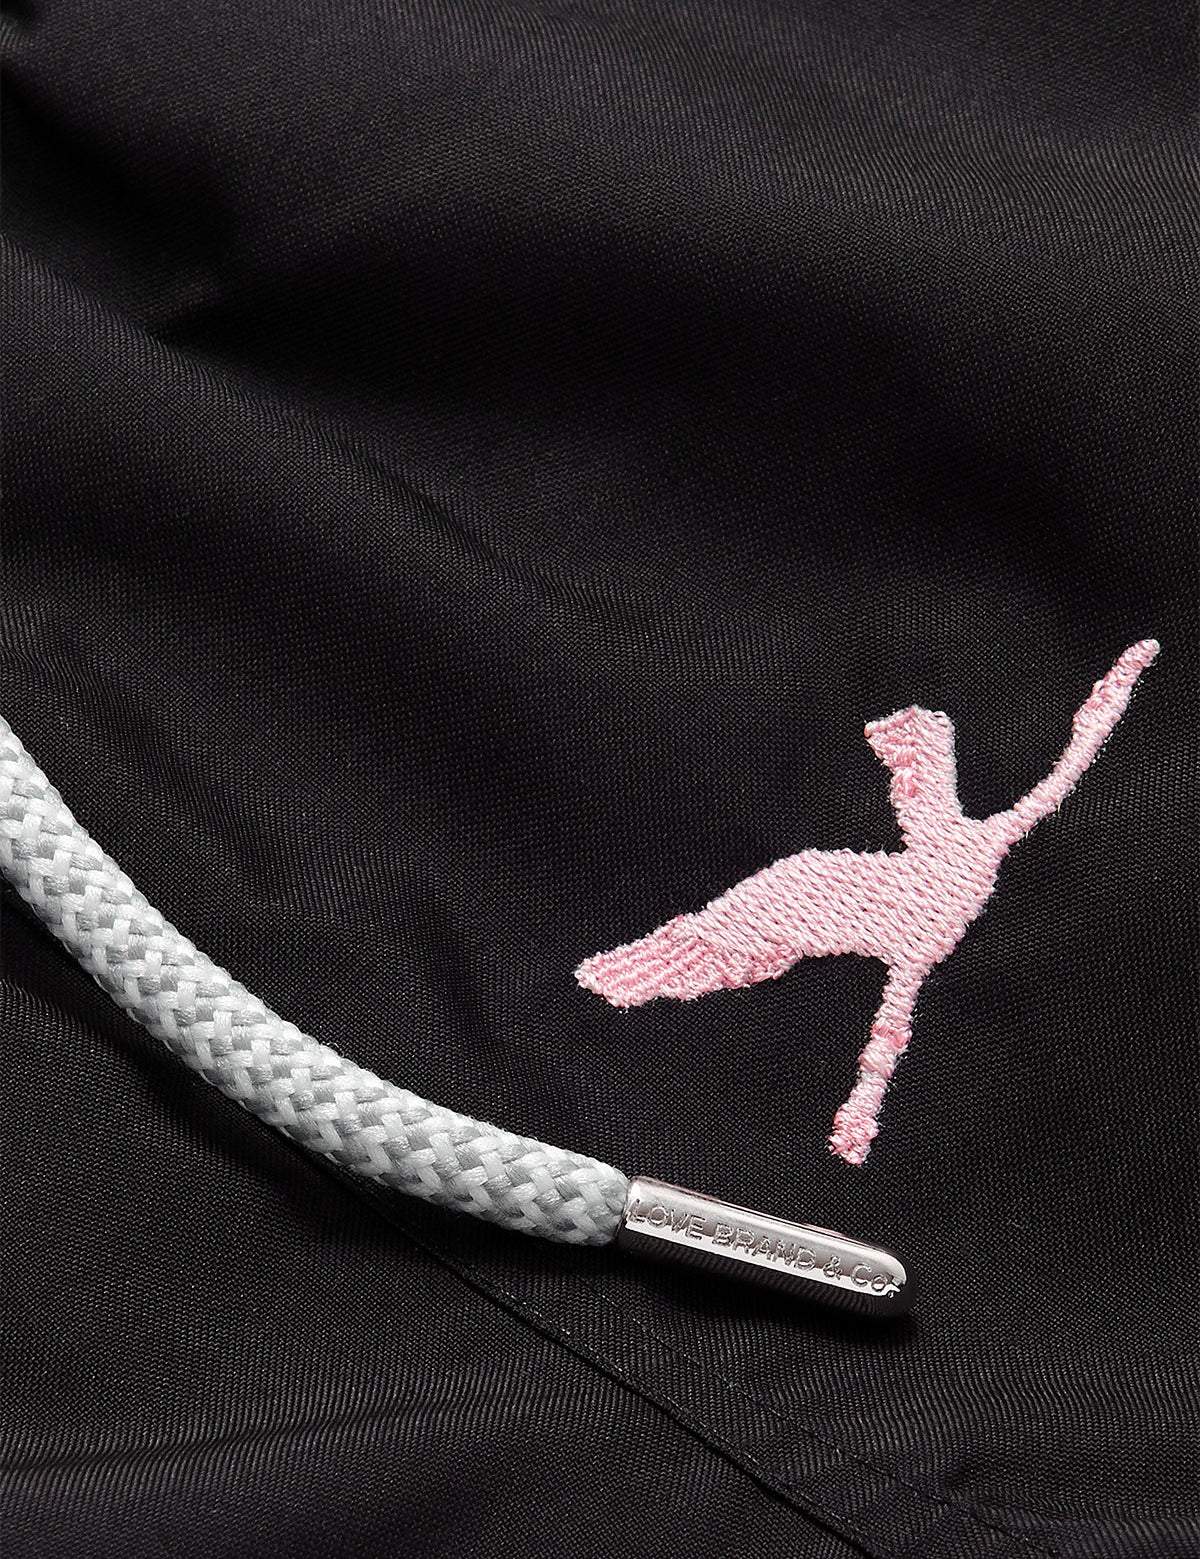 Close-up view of the Boys Lake Nakuru Staniel Swim Shorts, featuring a pink embroidered flamingo and a grey drawstring with metallic tips.